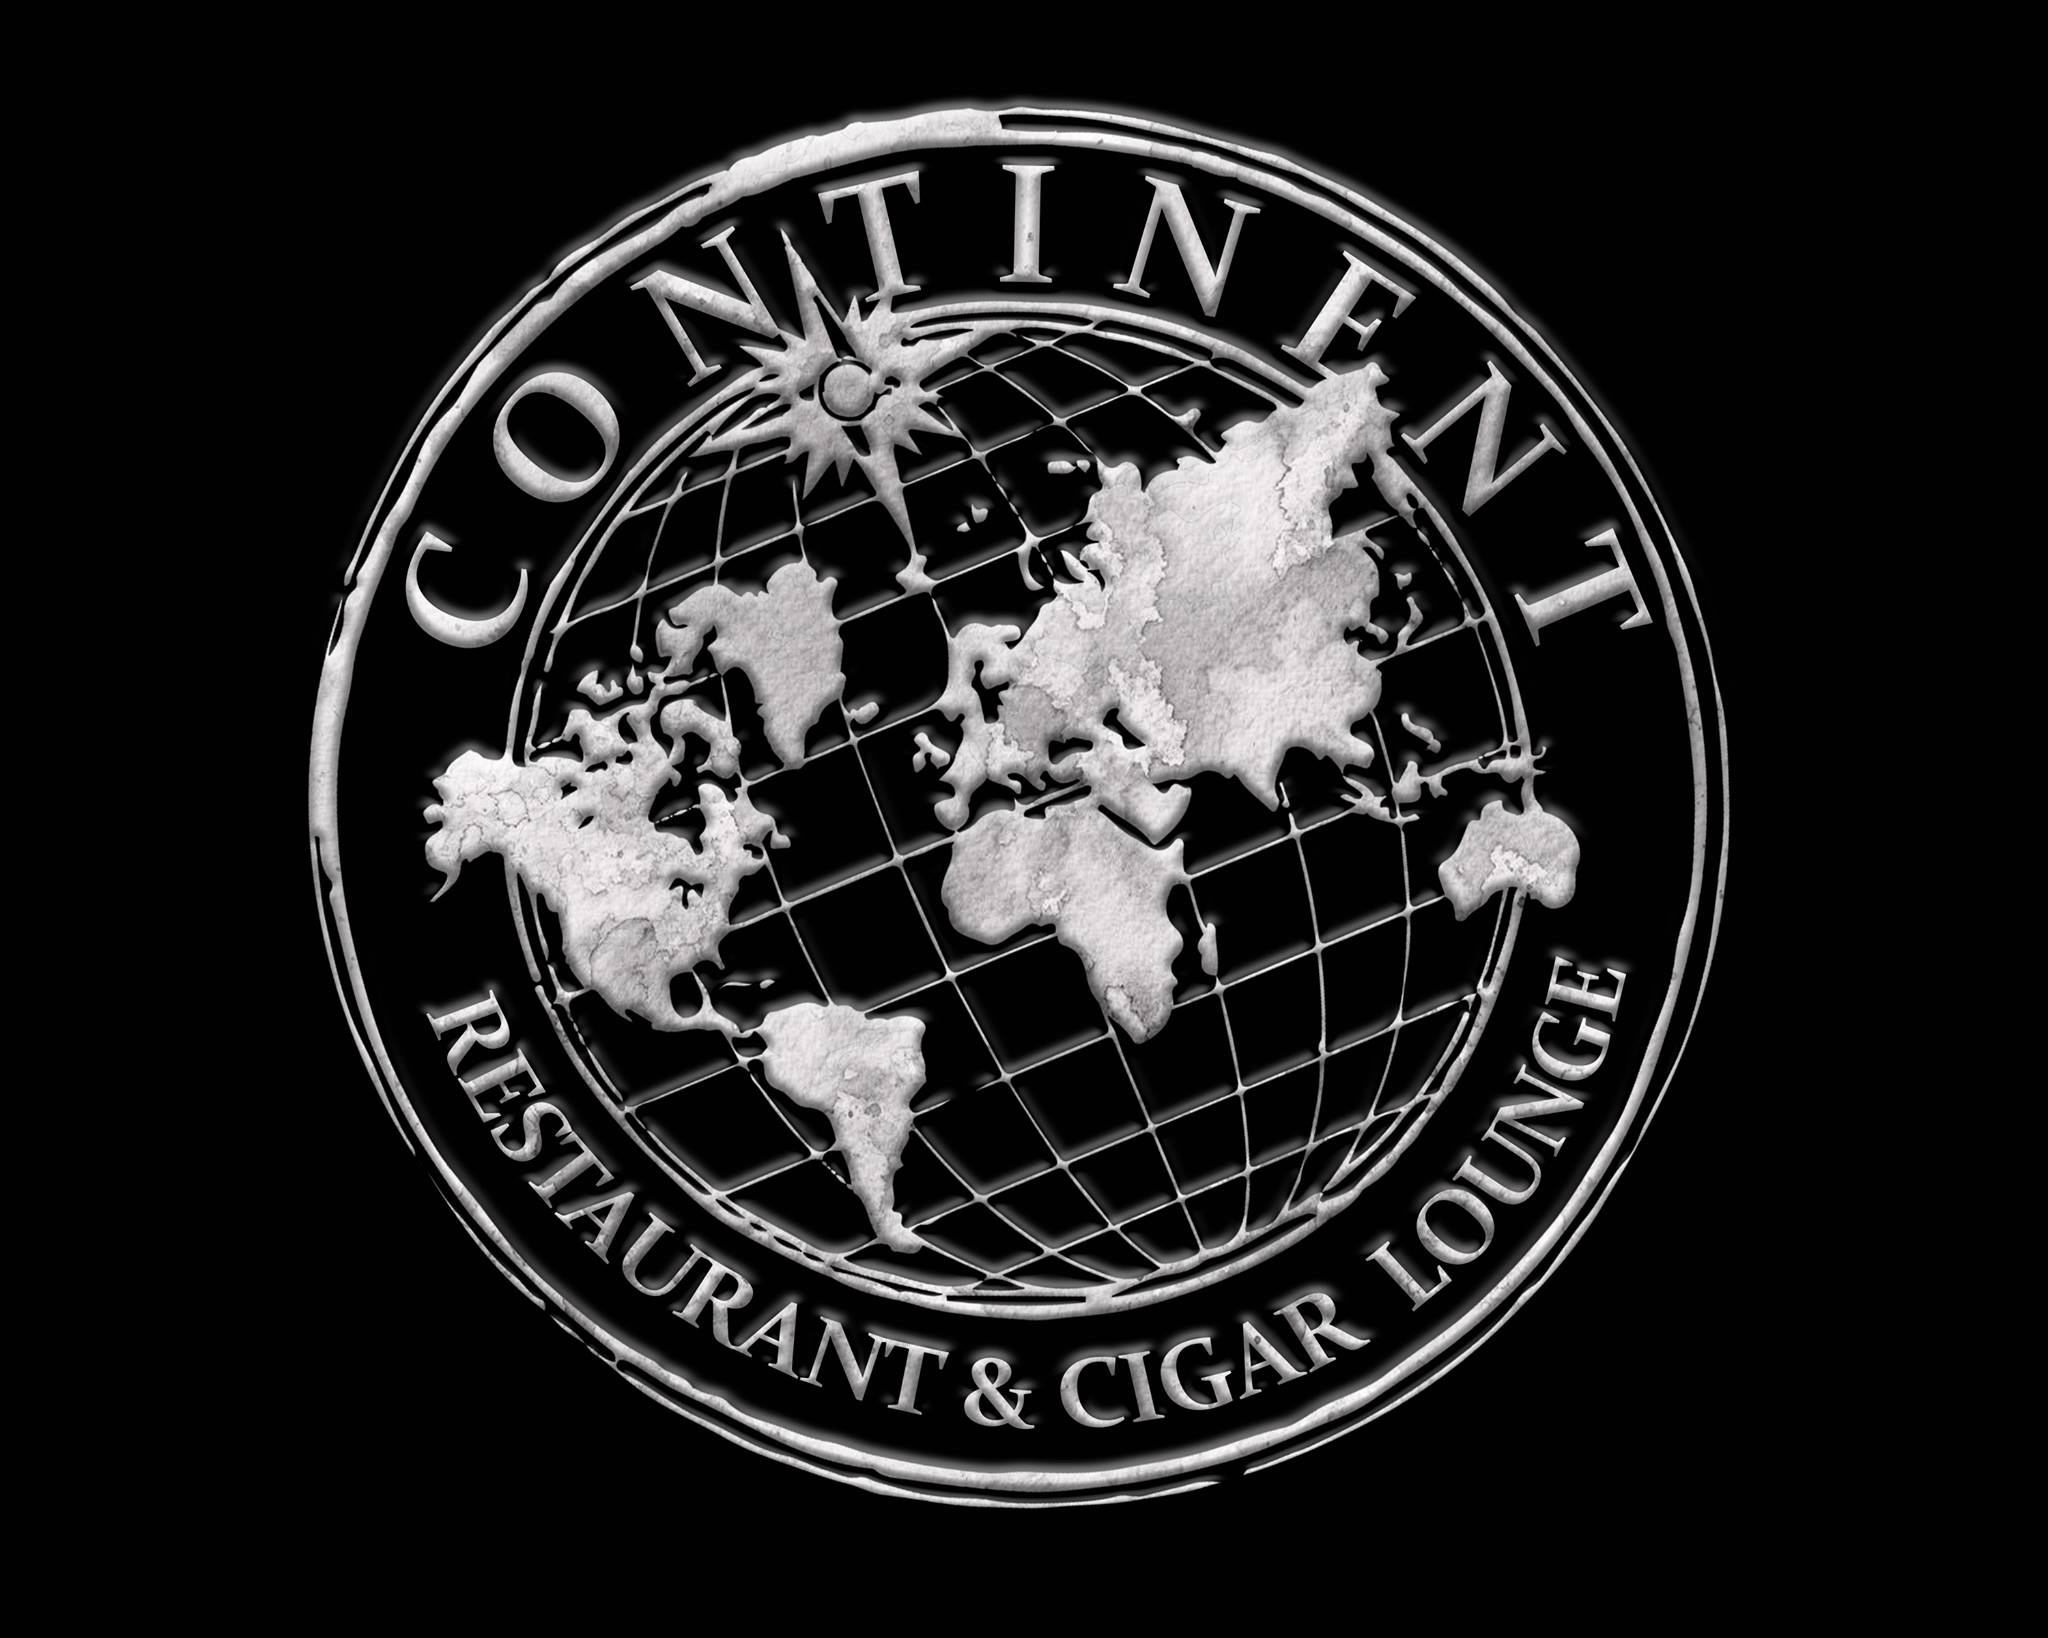 Continent Restaurant & Cigar Lounge - Black Owned